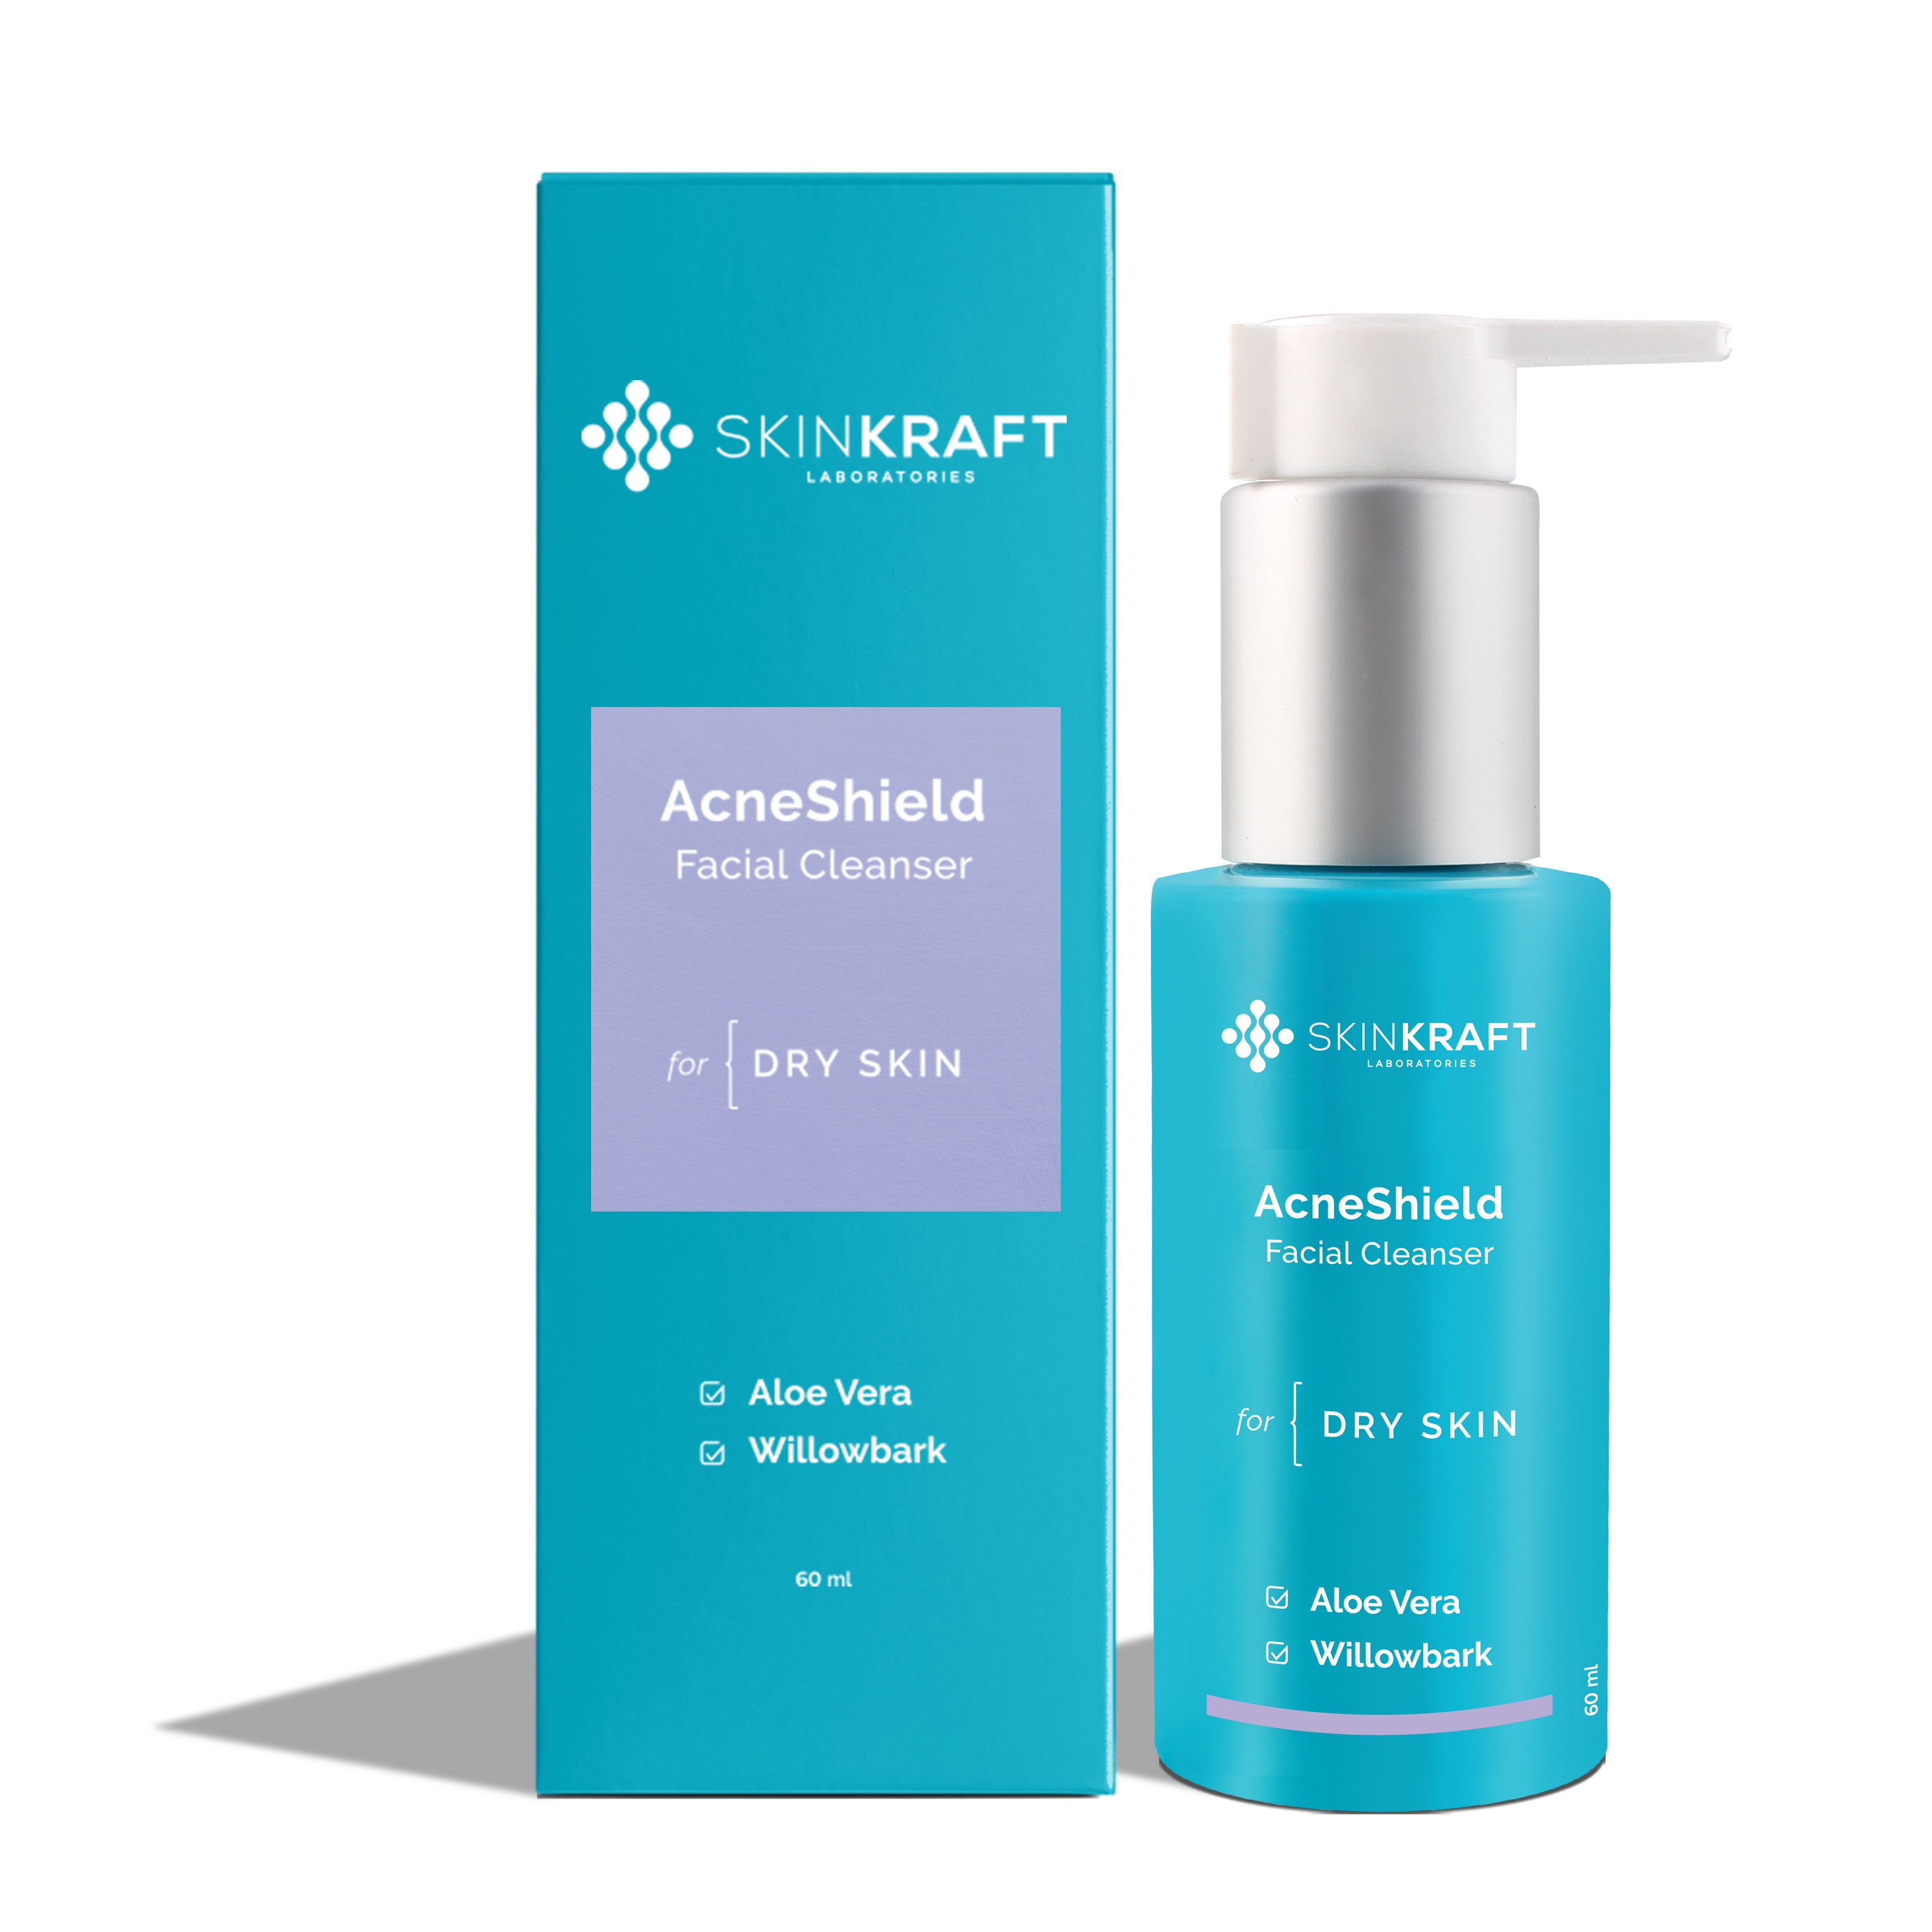 SKINKRAFT ADDS OVER 20 NEW PRODUCTS TO THEIR SKINCARE PORTFOLIO